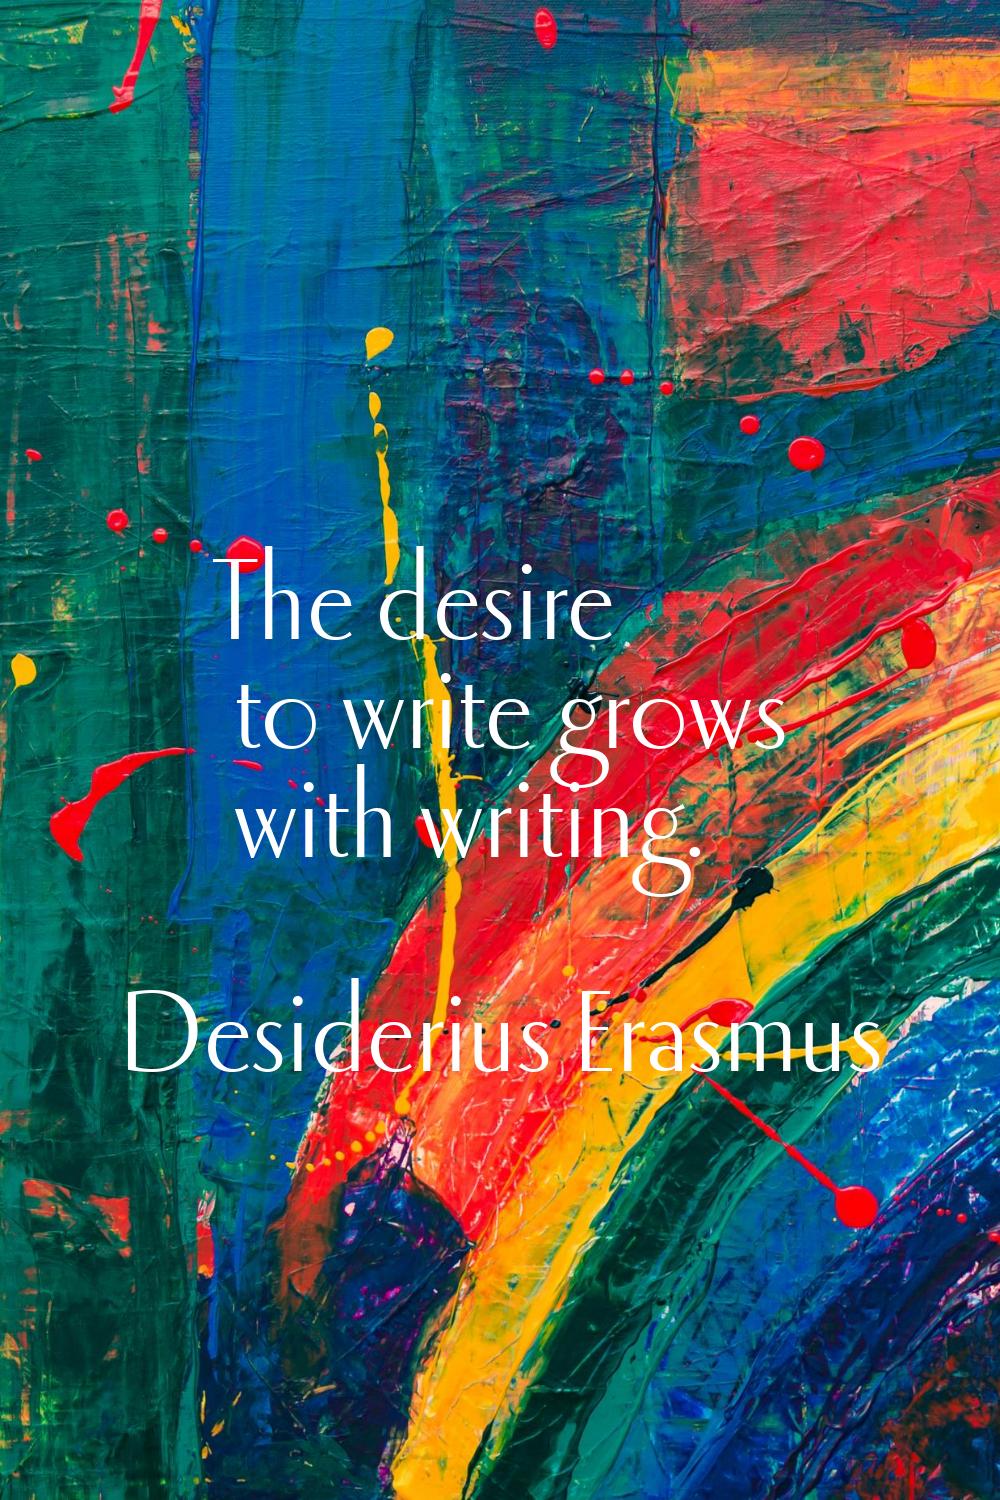 The desire to write grows with writing.